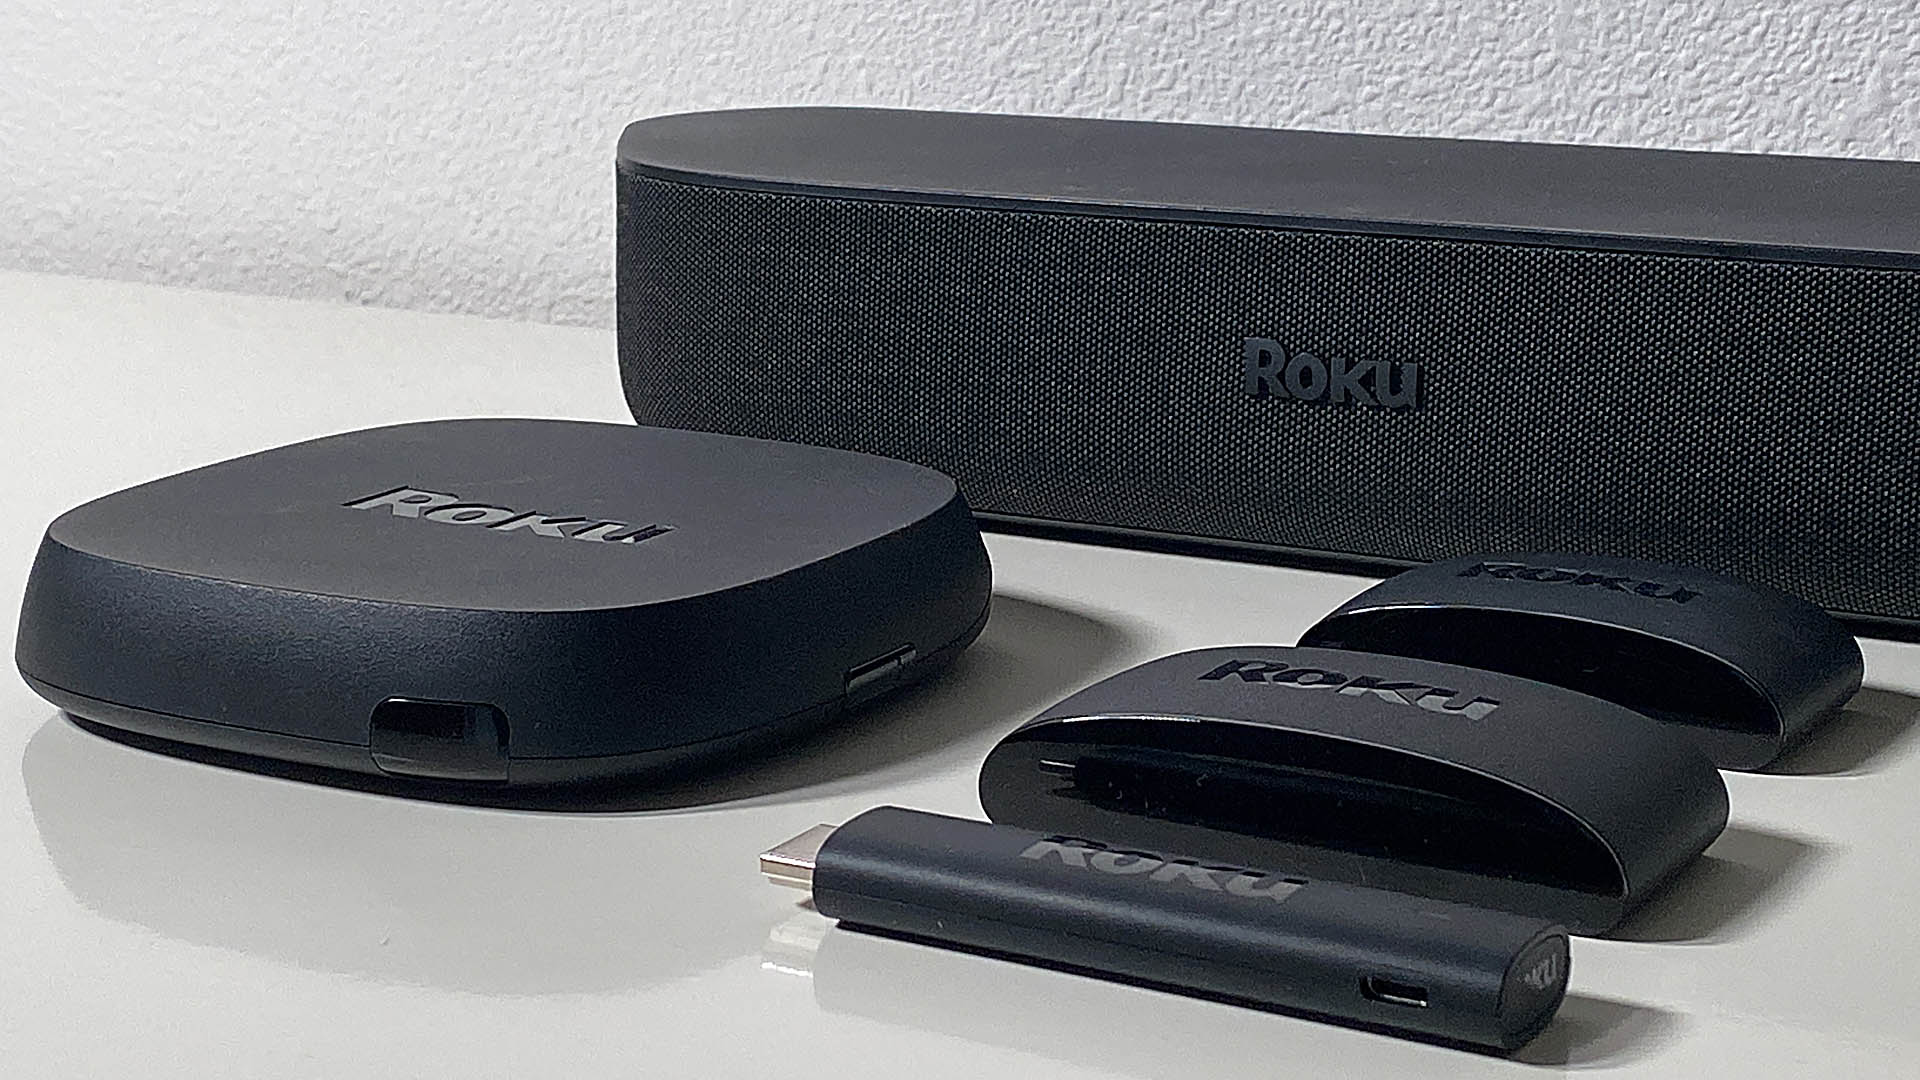 Roku is the CCN Reader Favorite Streaming Device Brand (Cordie Awards 2021)